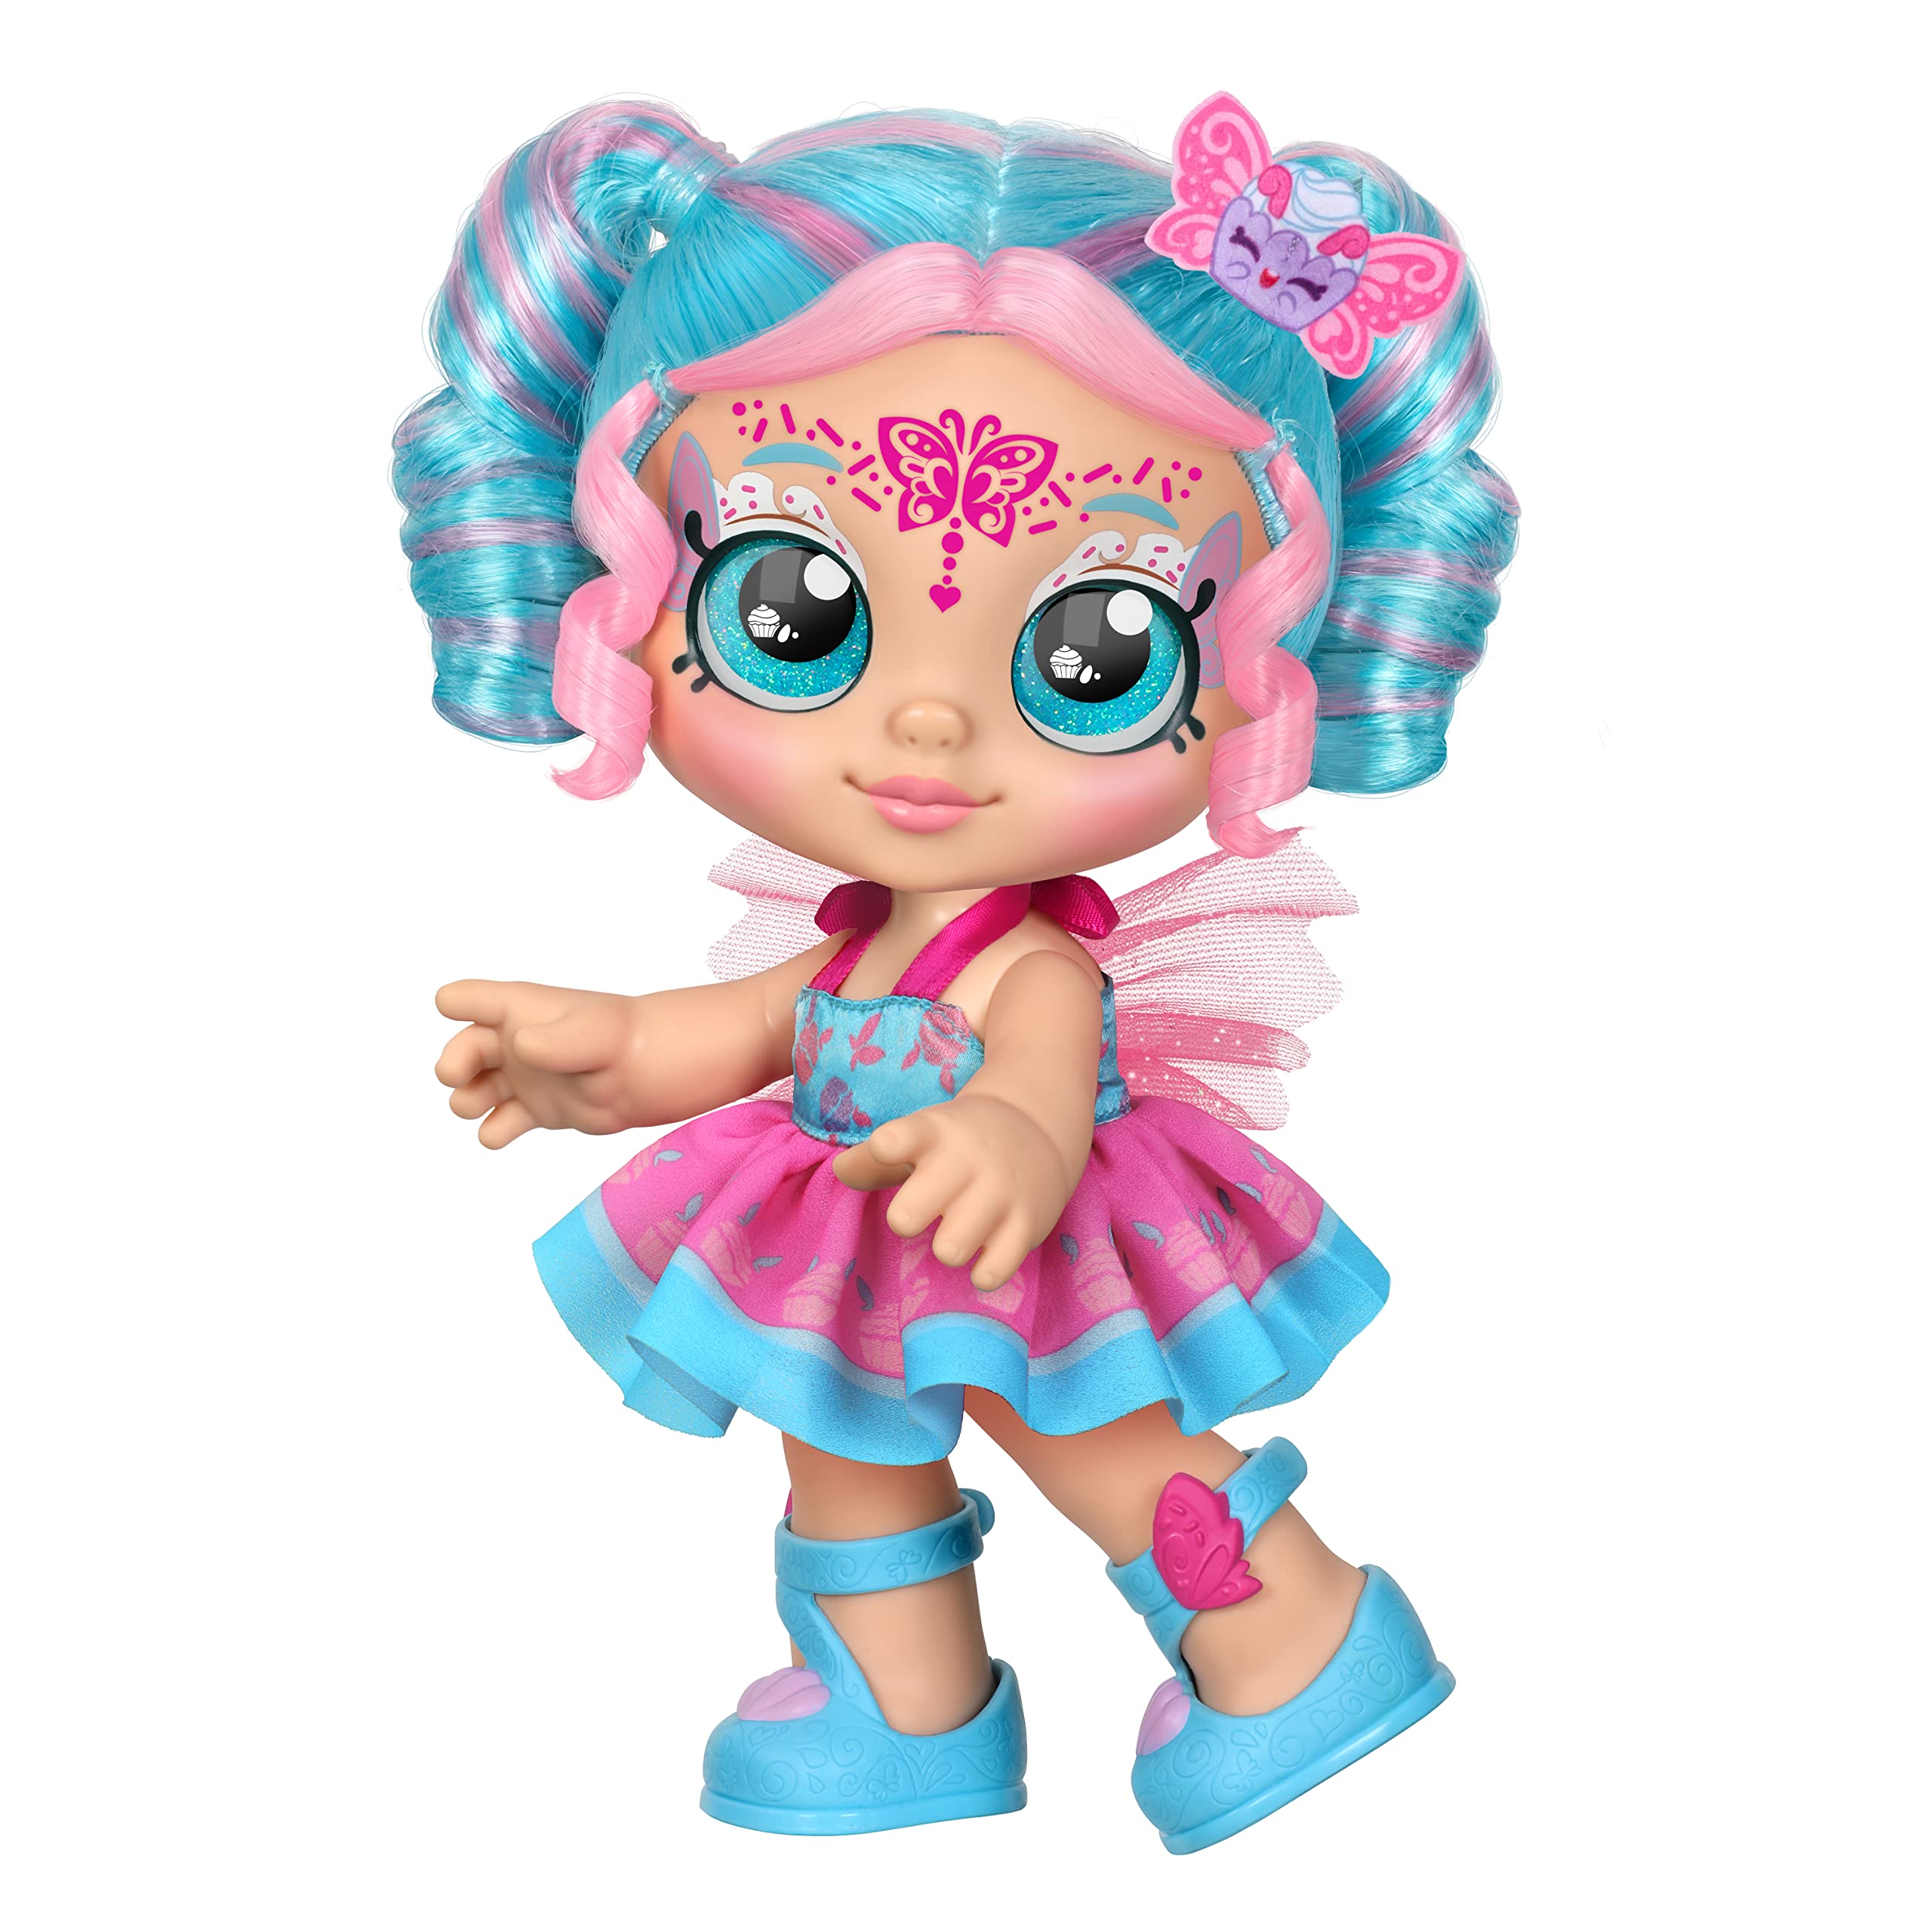 Kindi Kids 50243 Dress Jessicake Fairy Toddler face Paint Reveal, 1 Doll with Magic Sponge, Big Glittery Eyes, Changeable Clothes and Removable Shoes